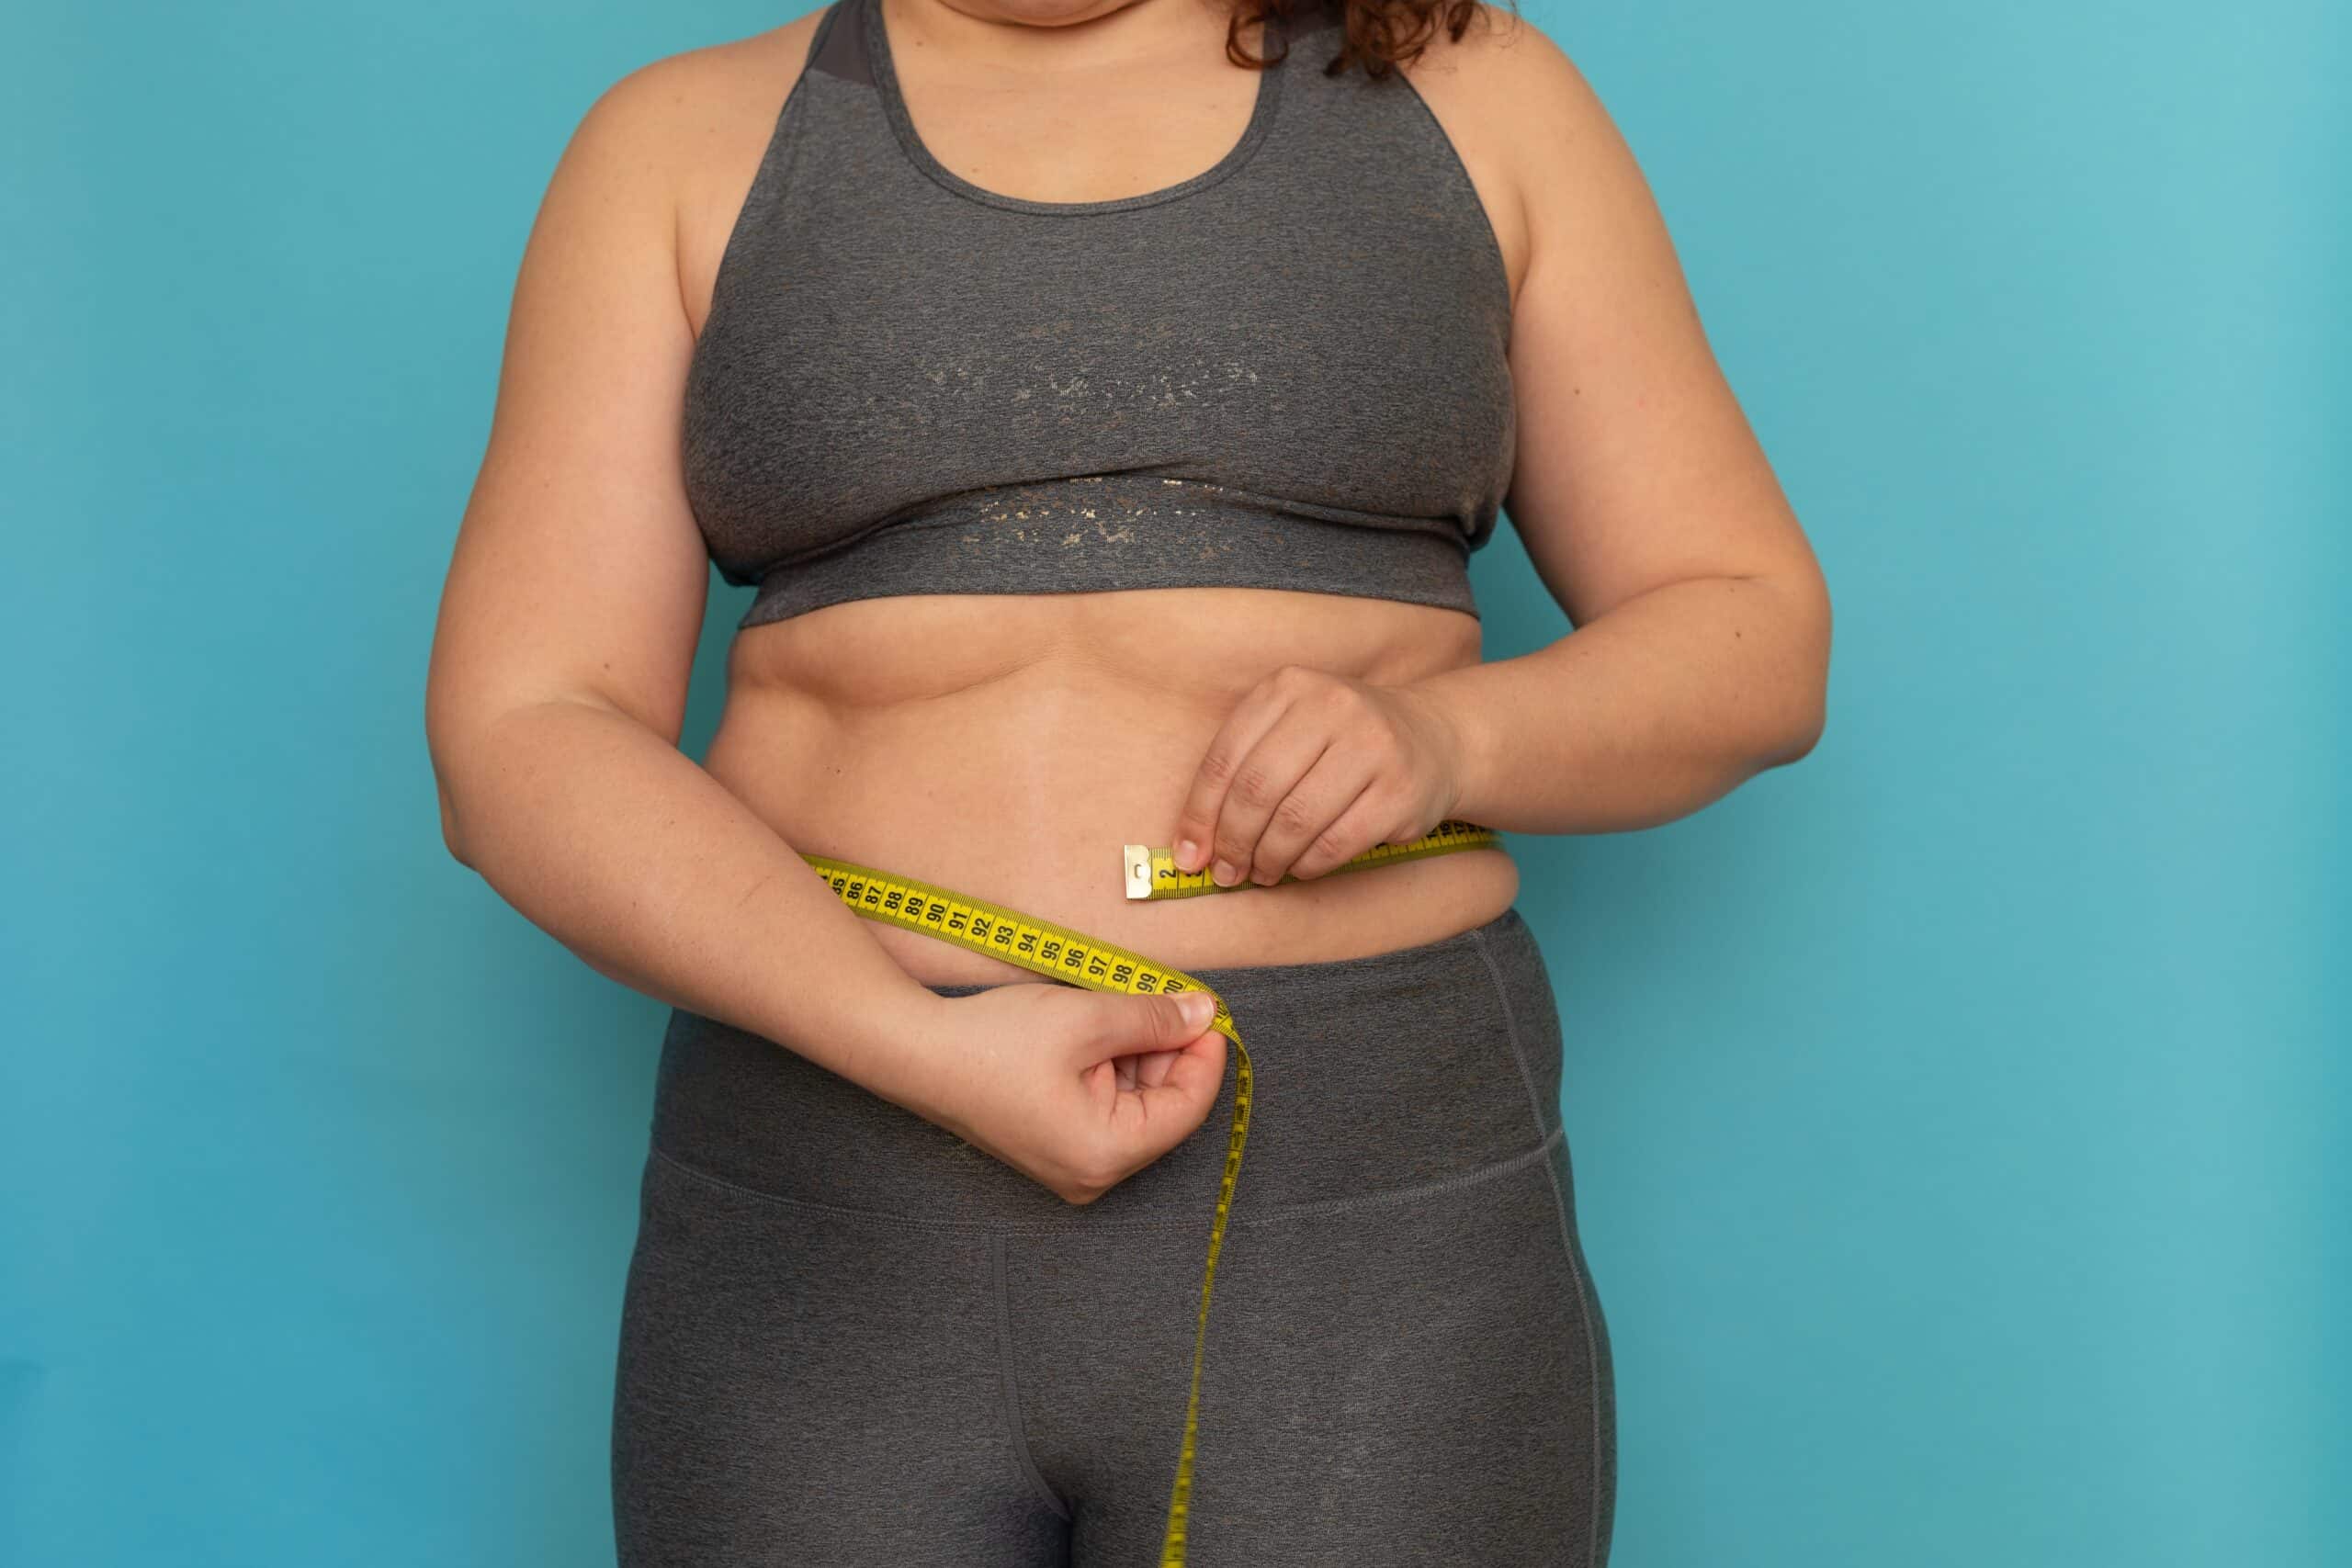 How small is a 30.5-inch waist?